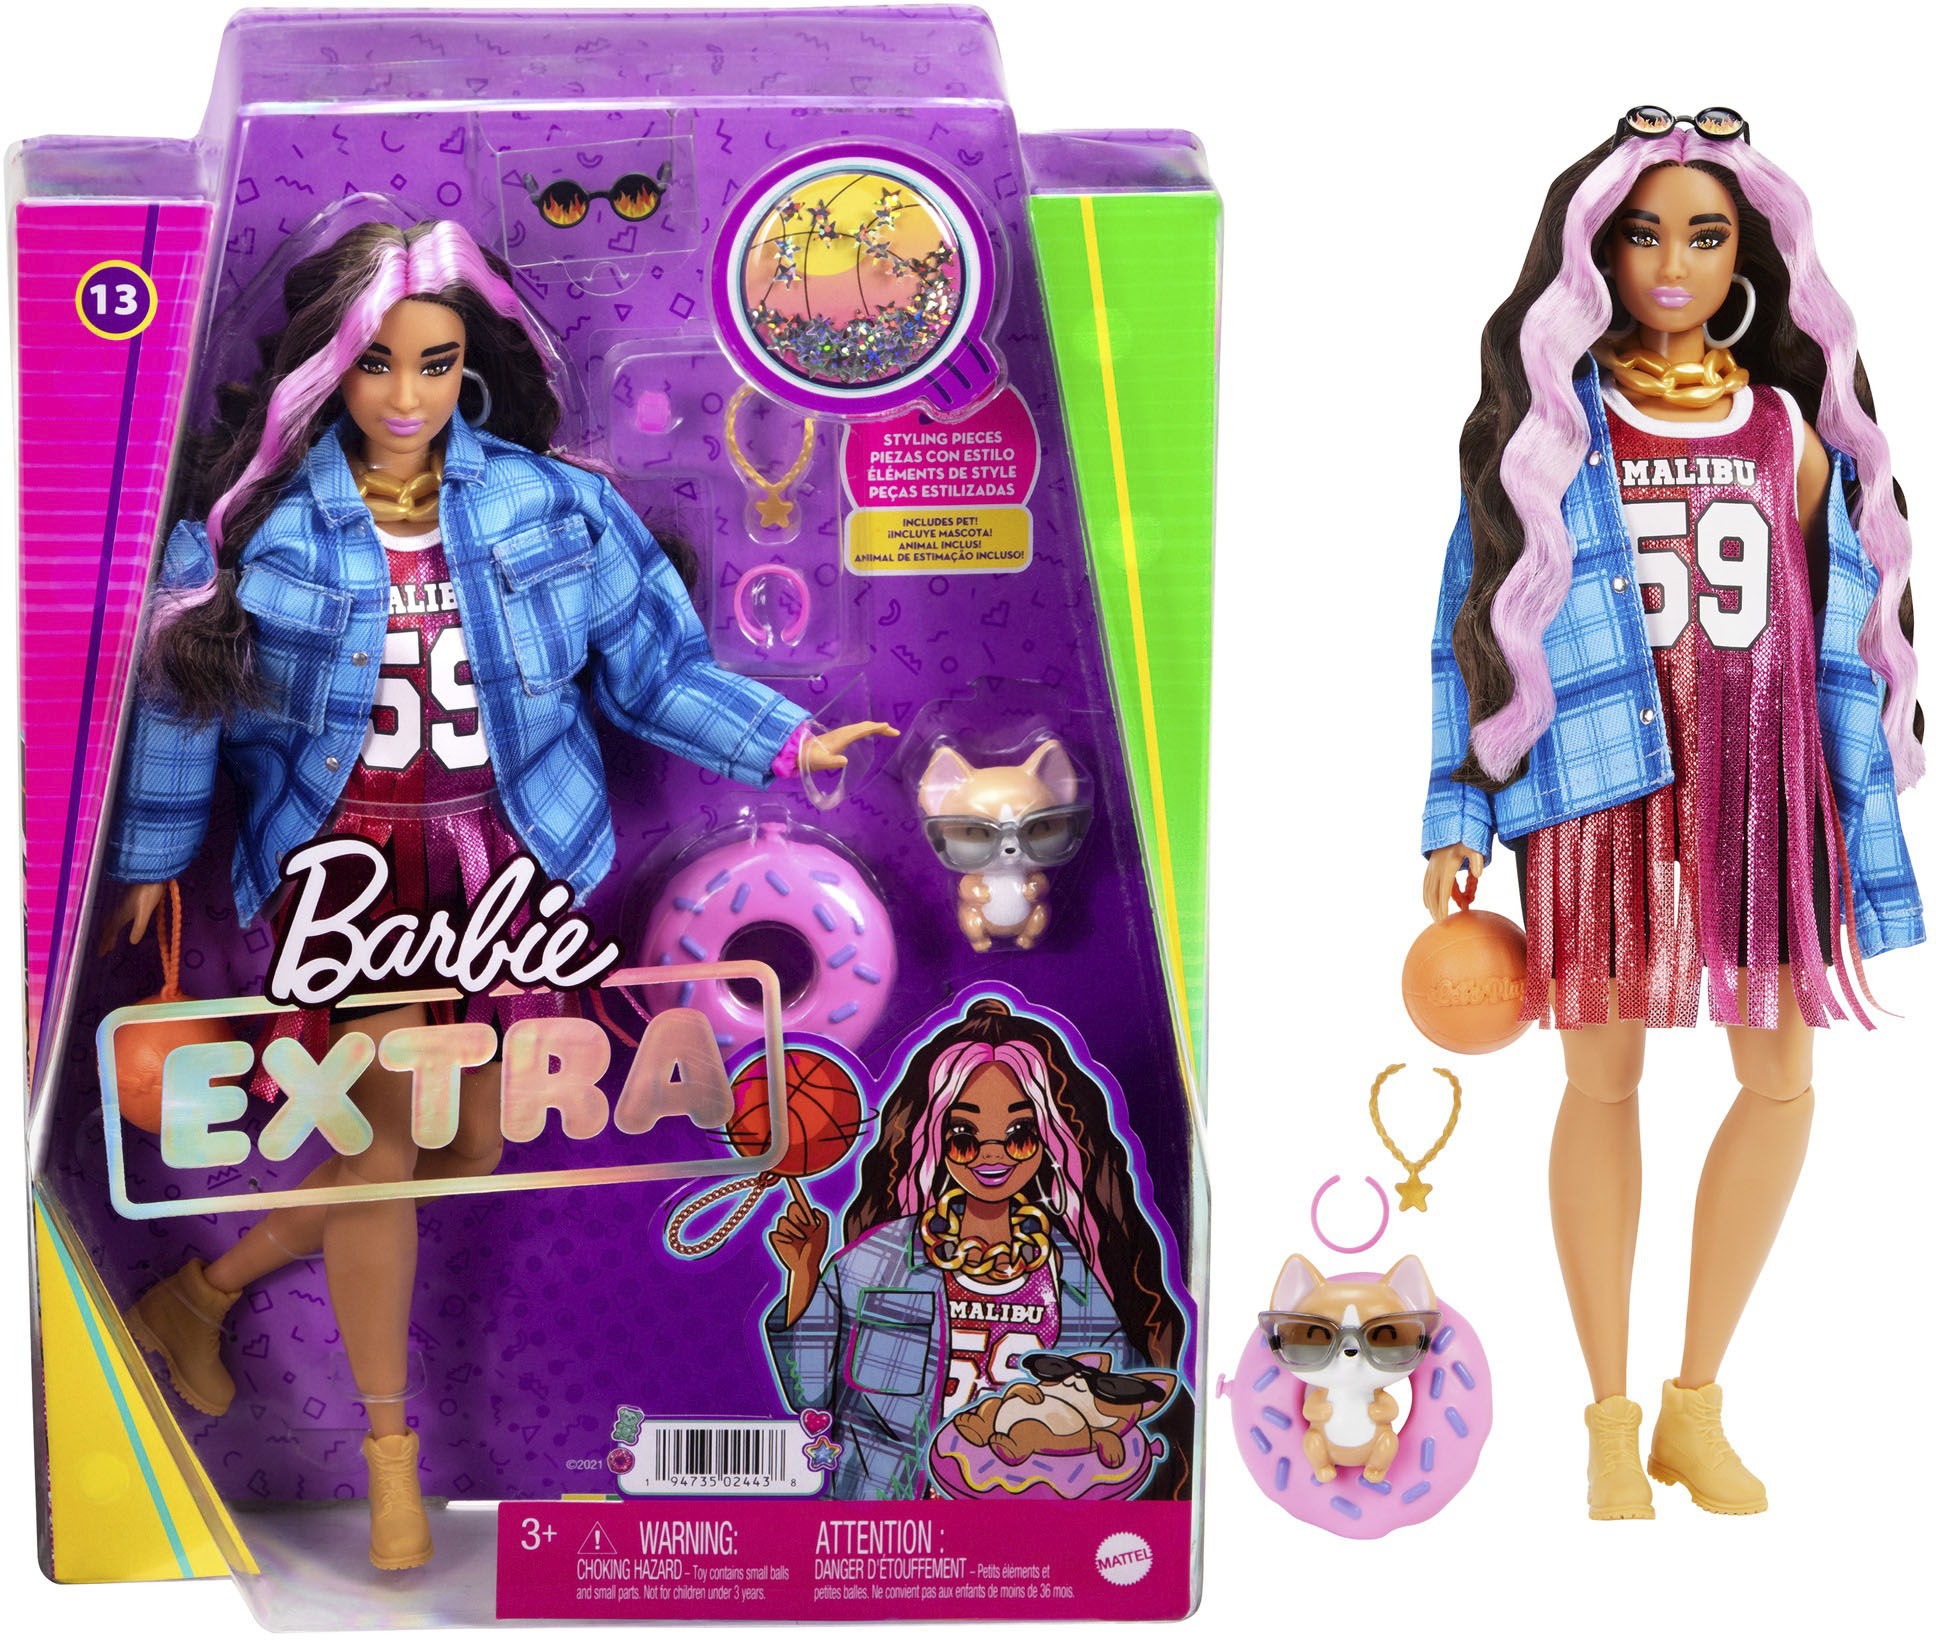 Barbie Extra Doll Styles May Vary GRN27 - Best Buy